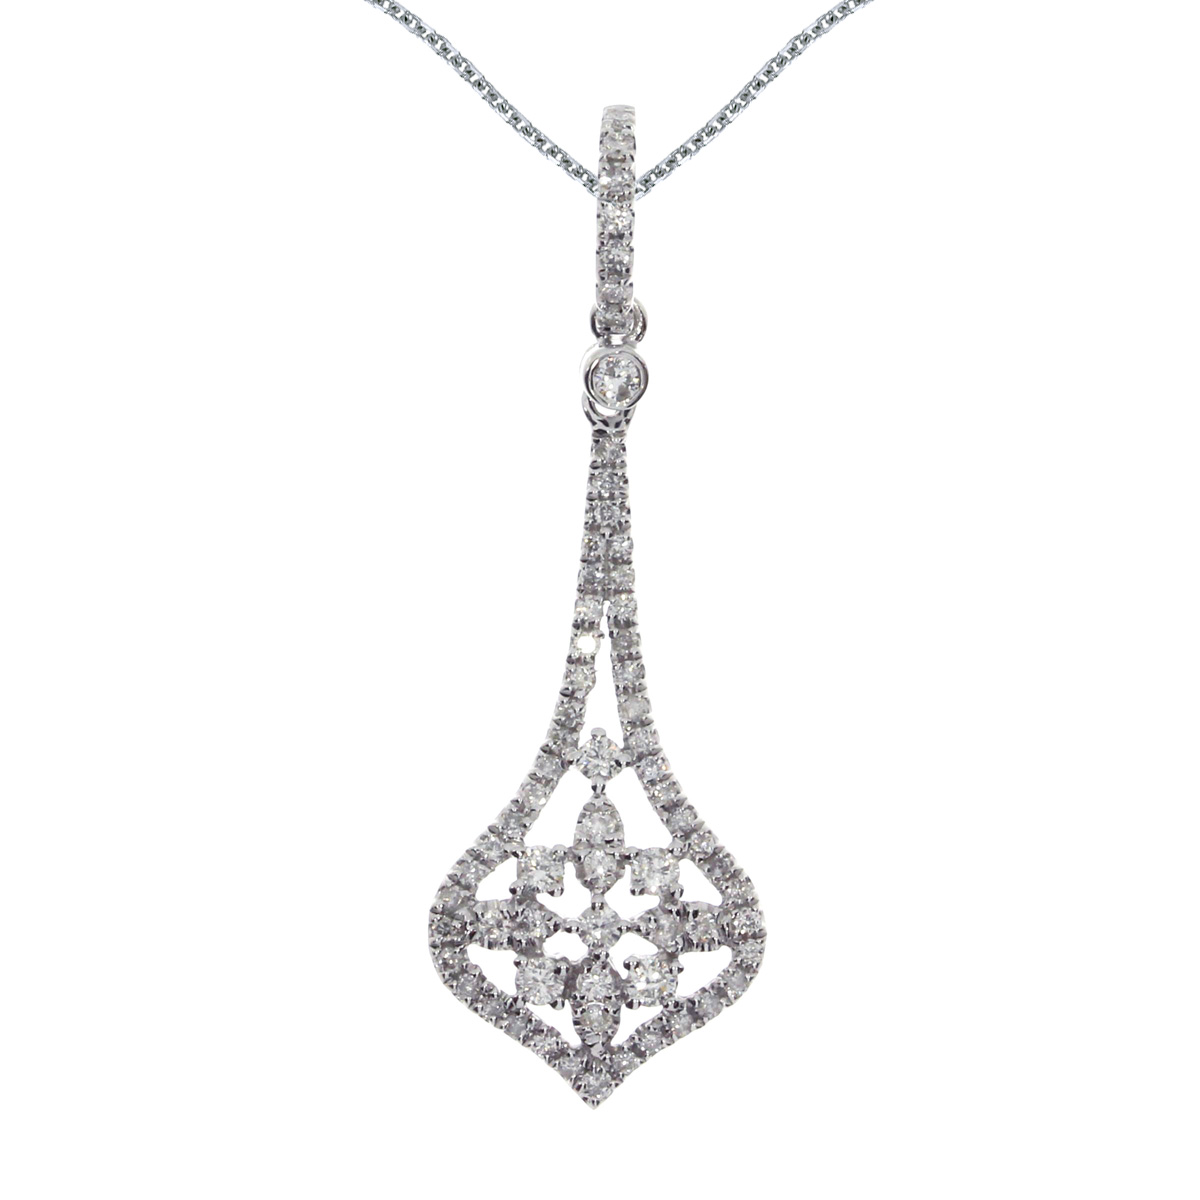 JCX3042: This elegant fashion pendant features .47 total ct diamonds in a beautiful 14k white gold design.